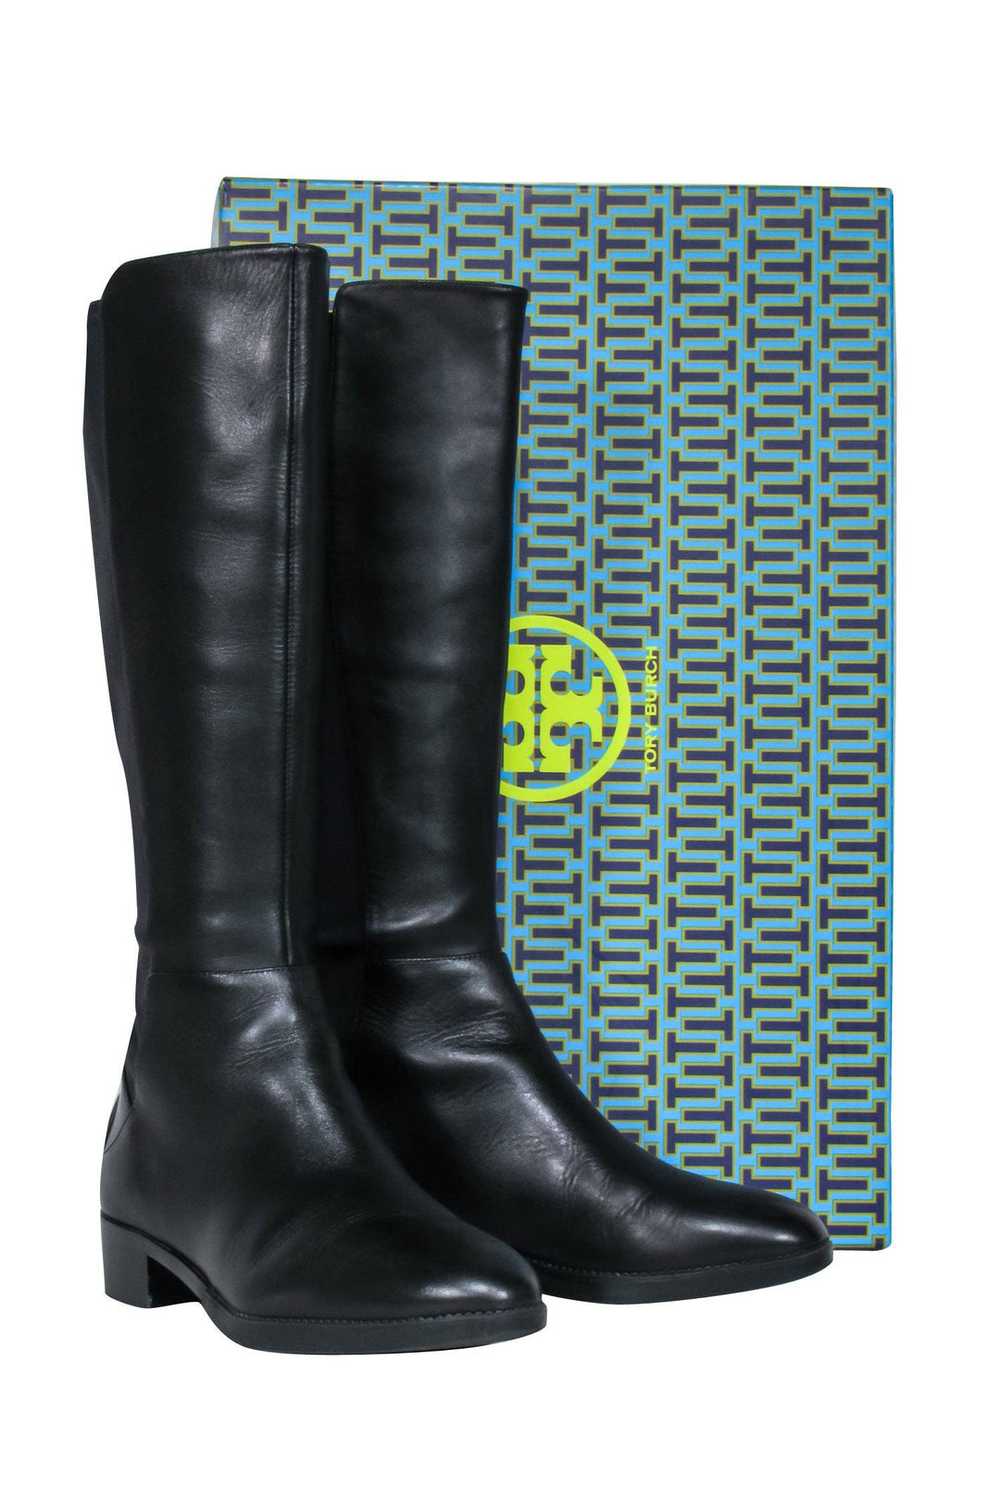 Tory Burch - Black Leather "Caitlin" Stretch Boot… - image 1